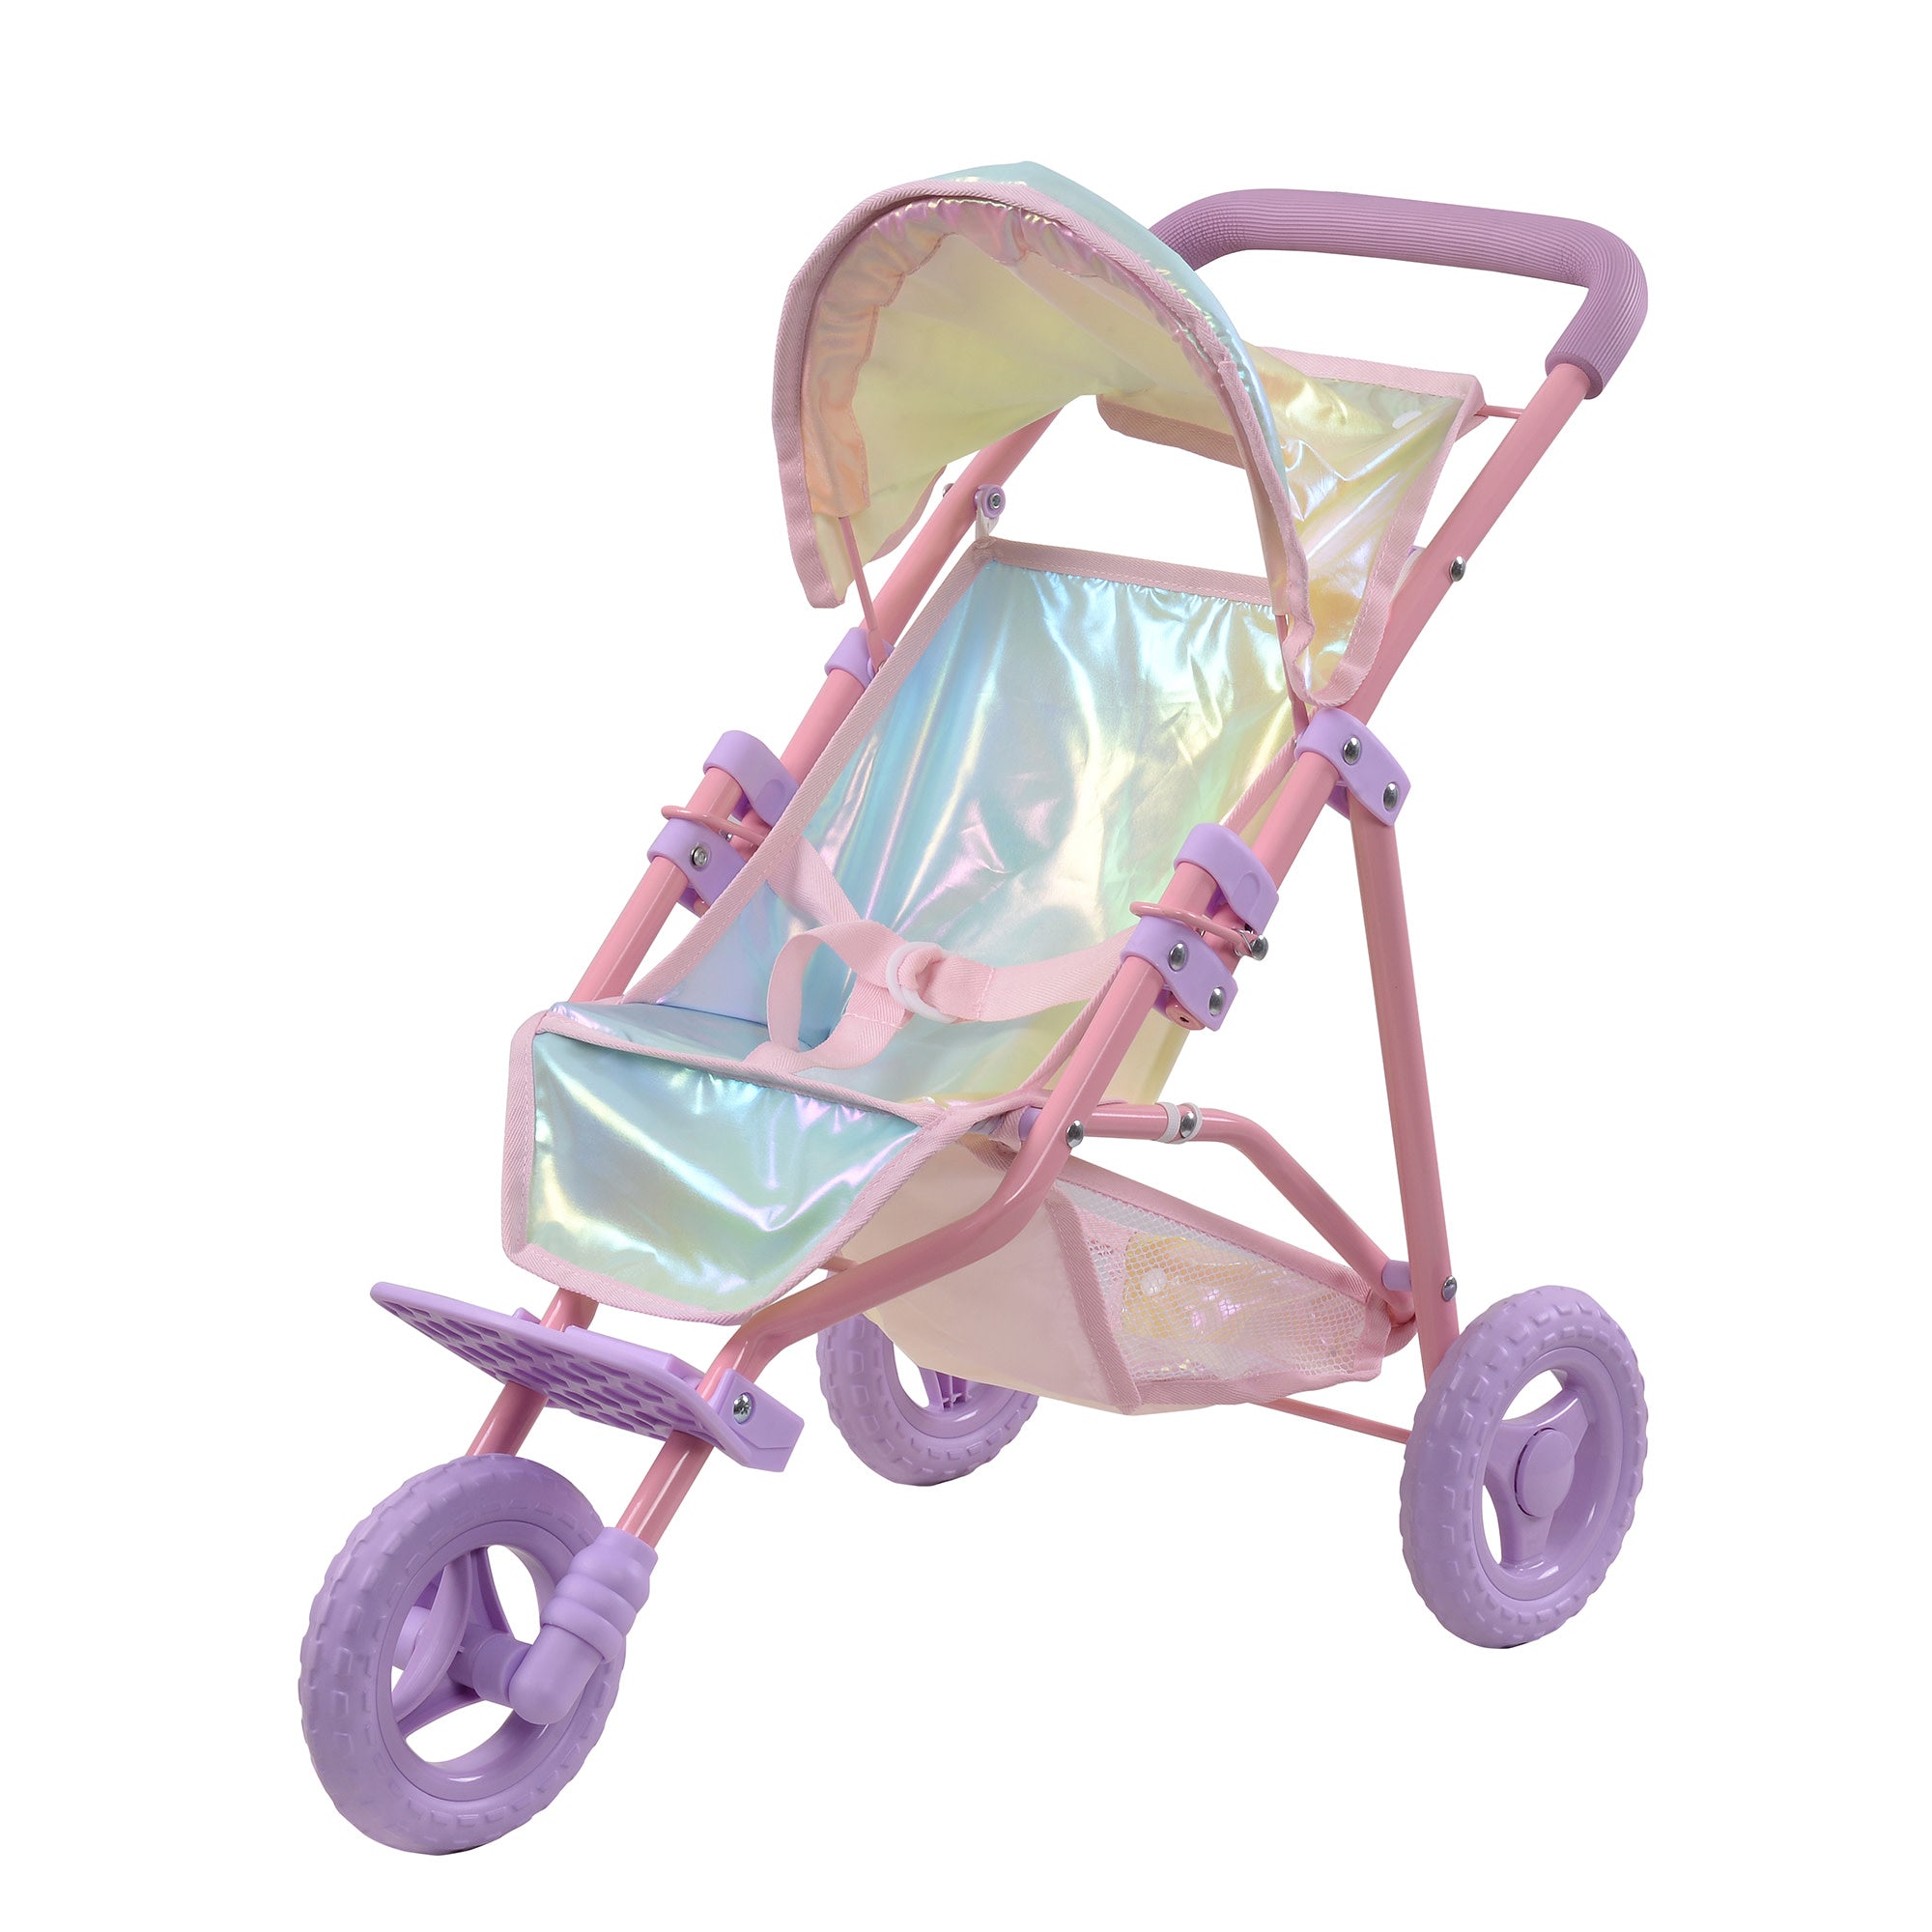 Olivia's Little World - Magical Dreamland Baby Doll Jogging Stroller - Iridescent color